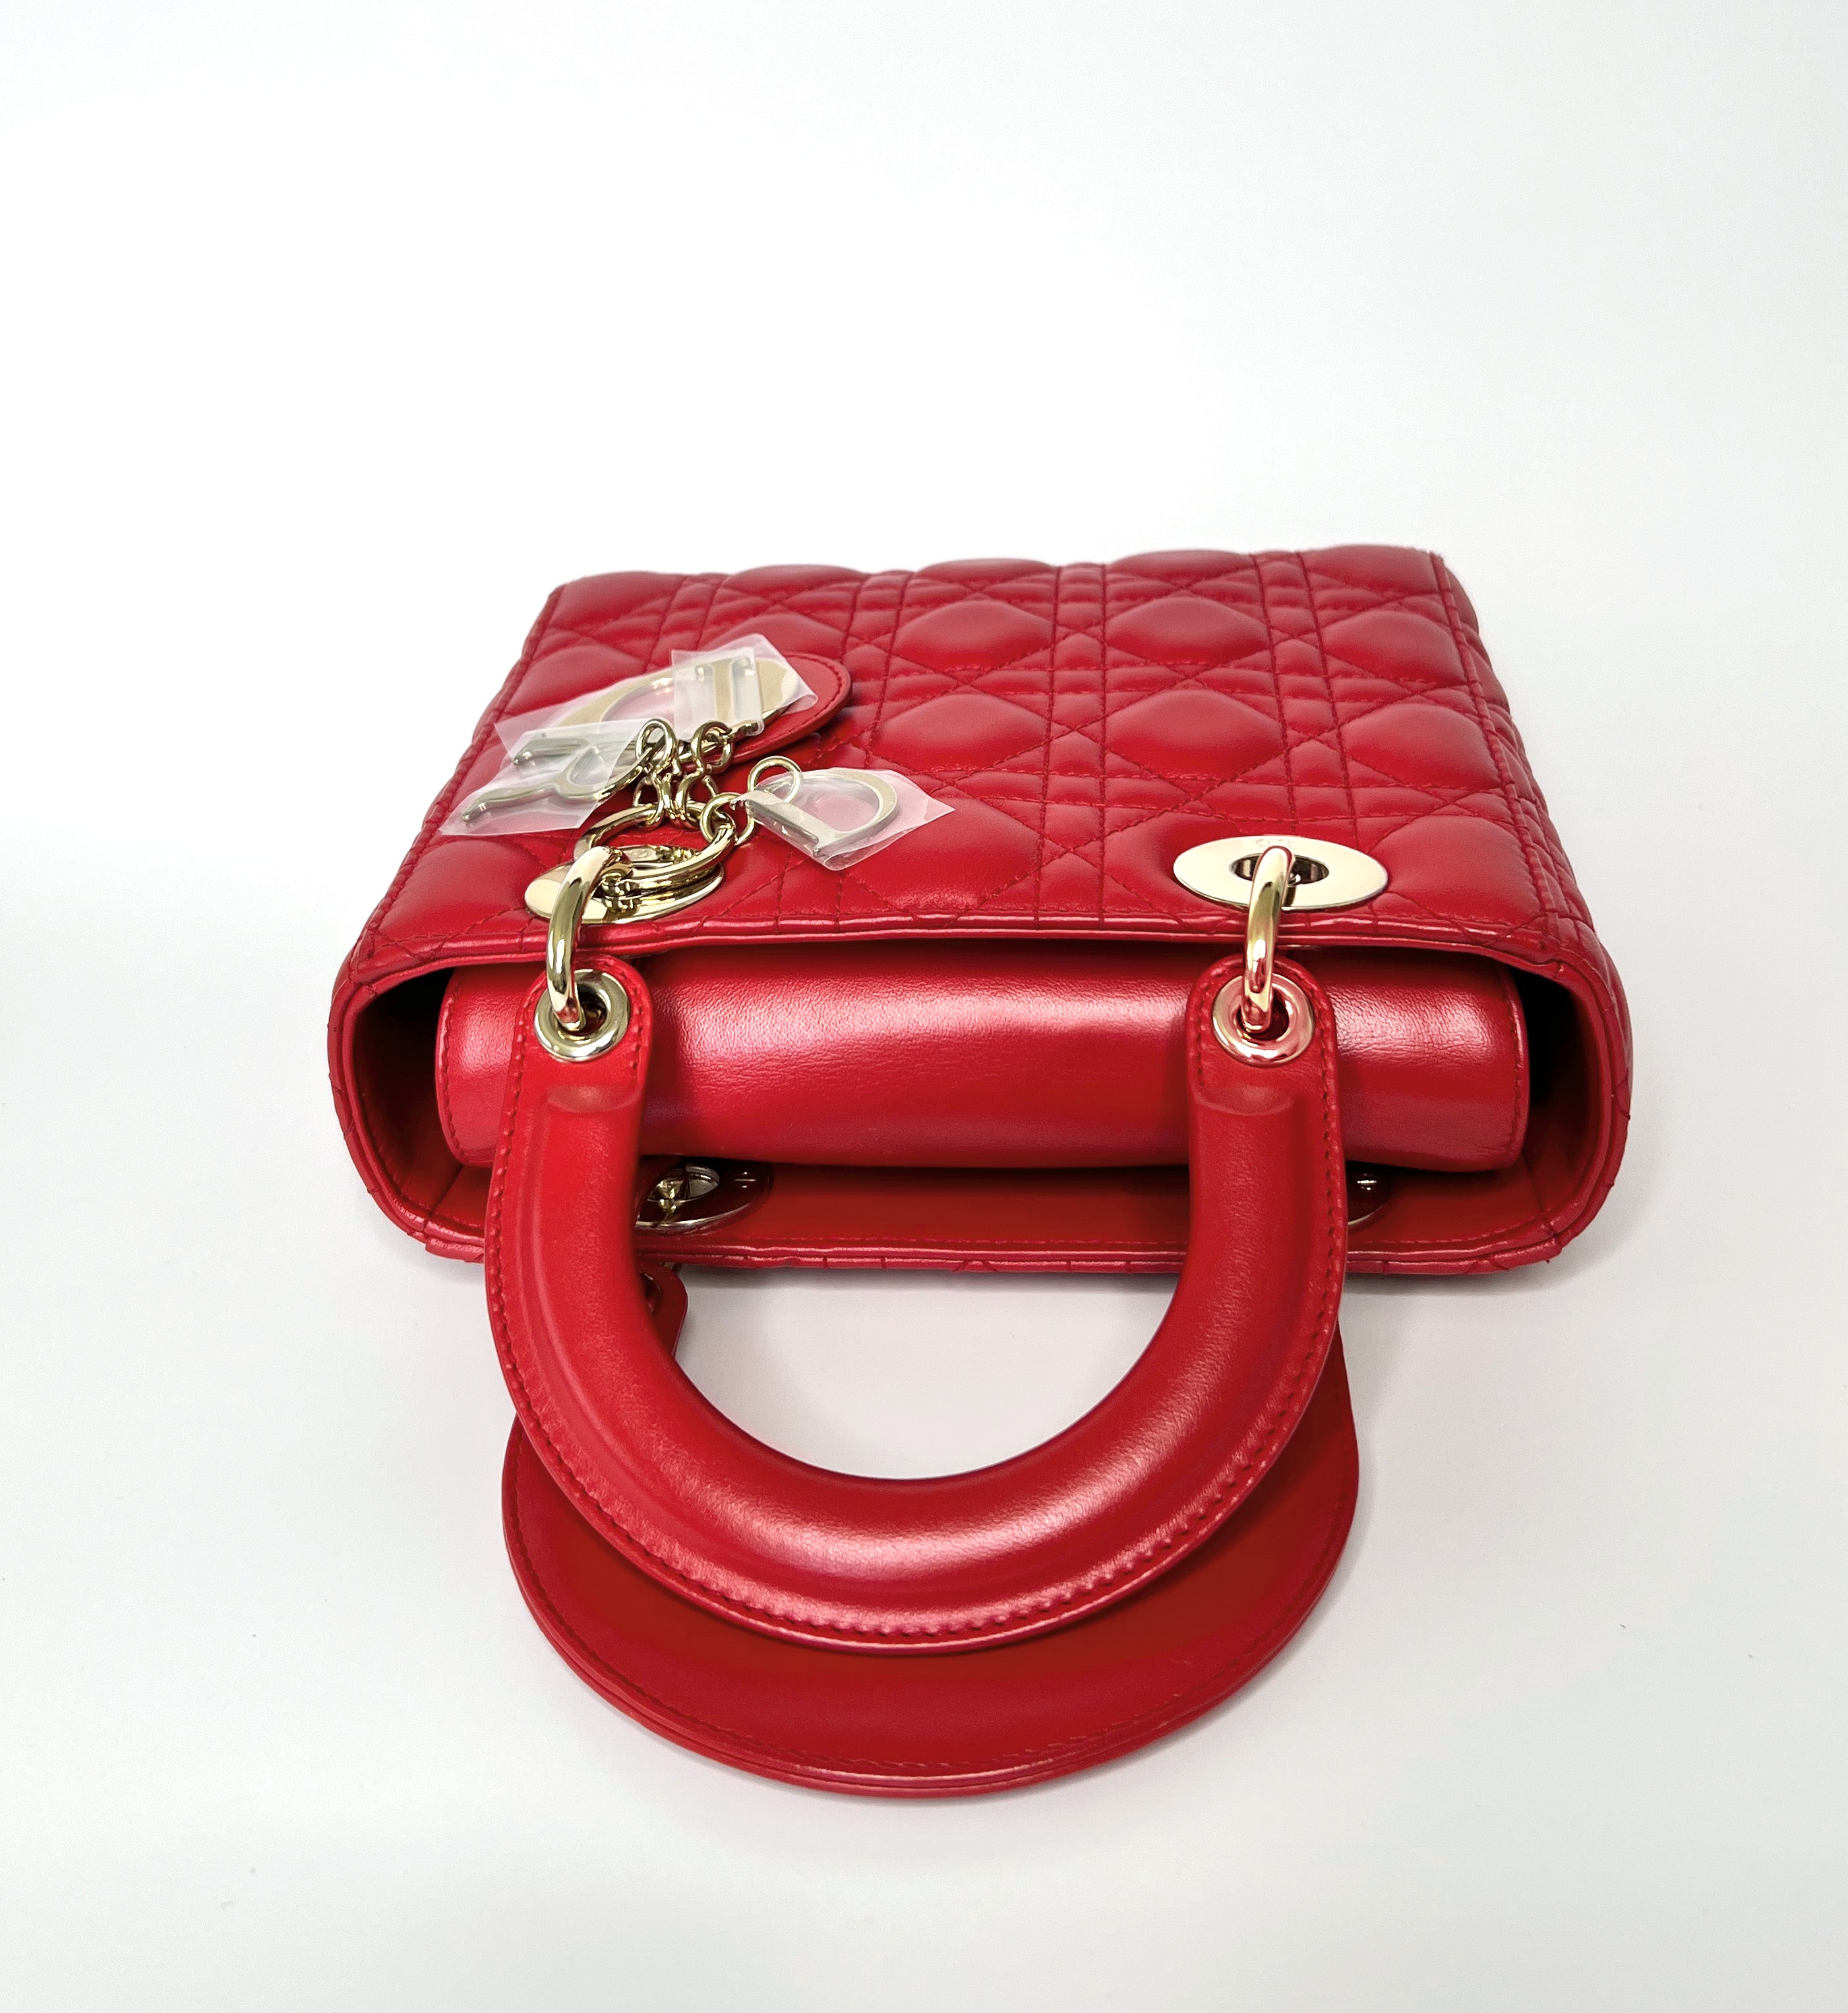 Lady Dior My ABC Small in Red With GHW